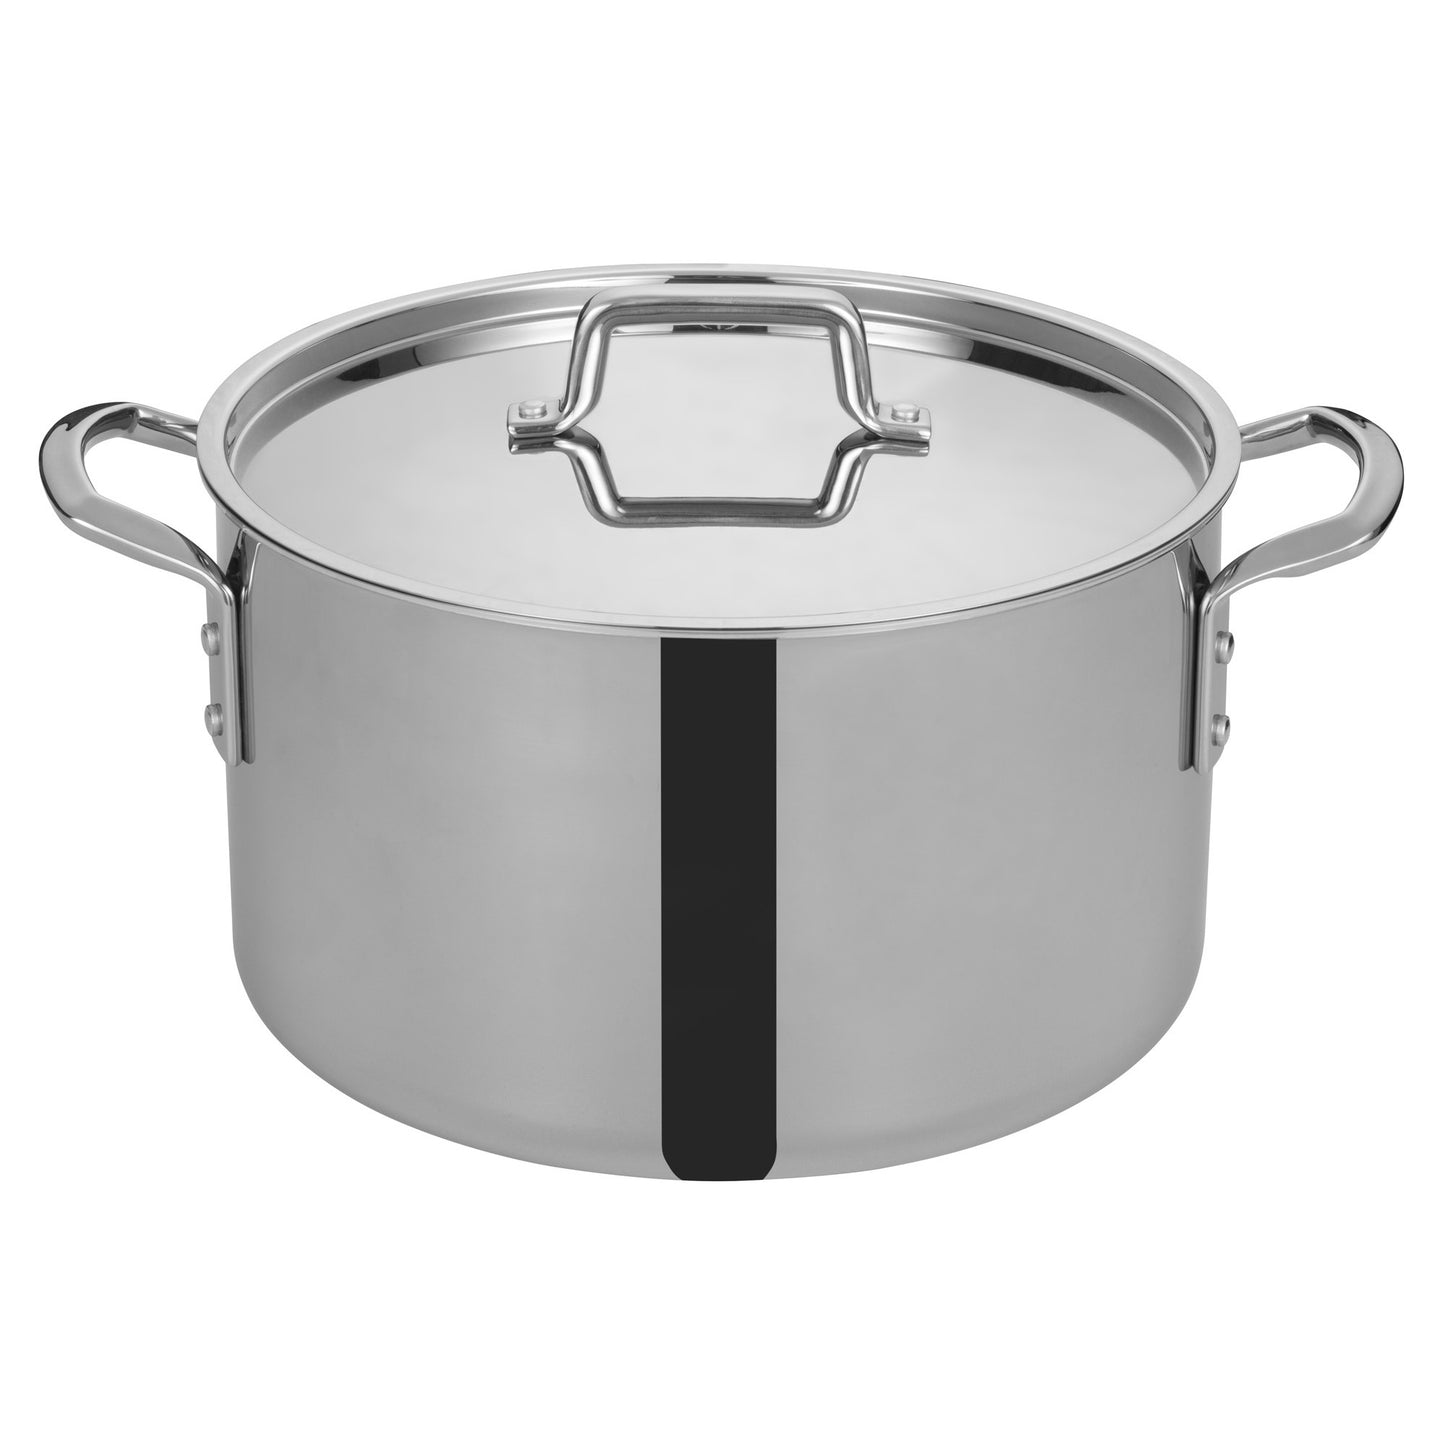 TGSP-16 - Tri-Gen Tri-Ply Stainless Steel Stock Pot with Cover - 16 Quart